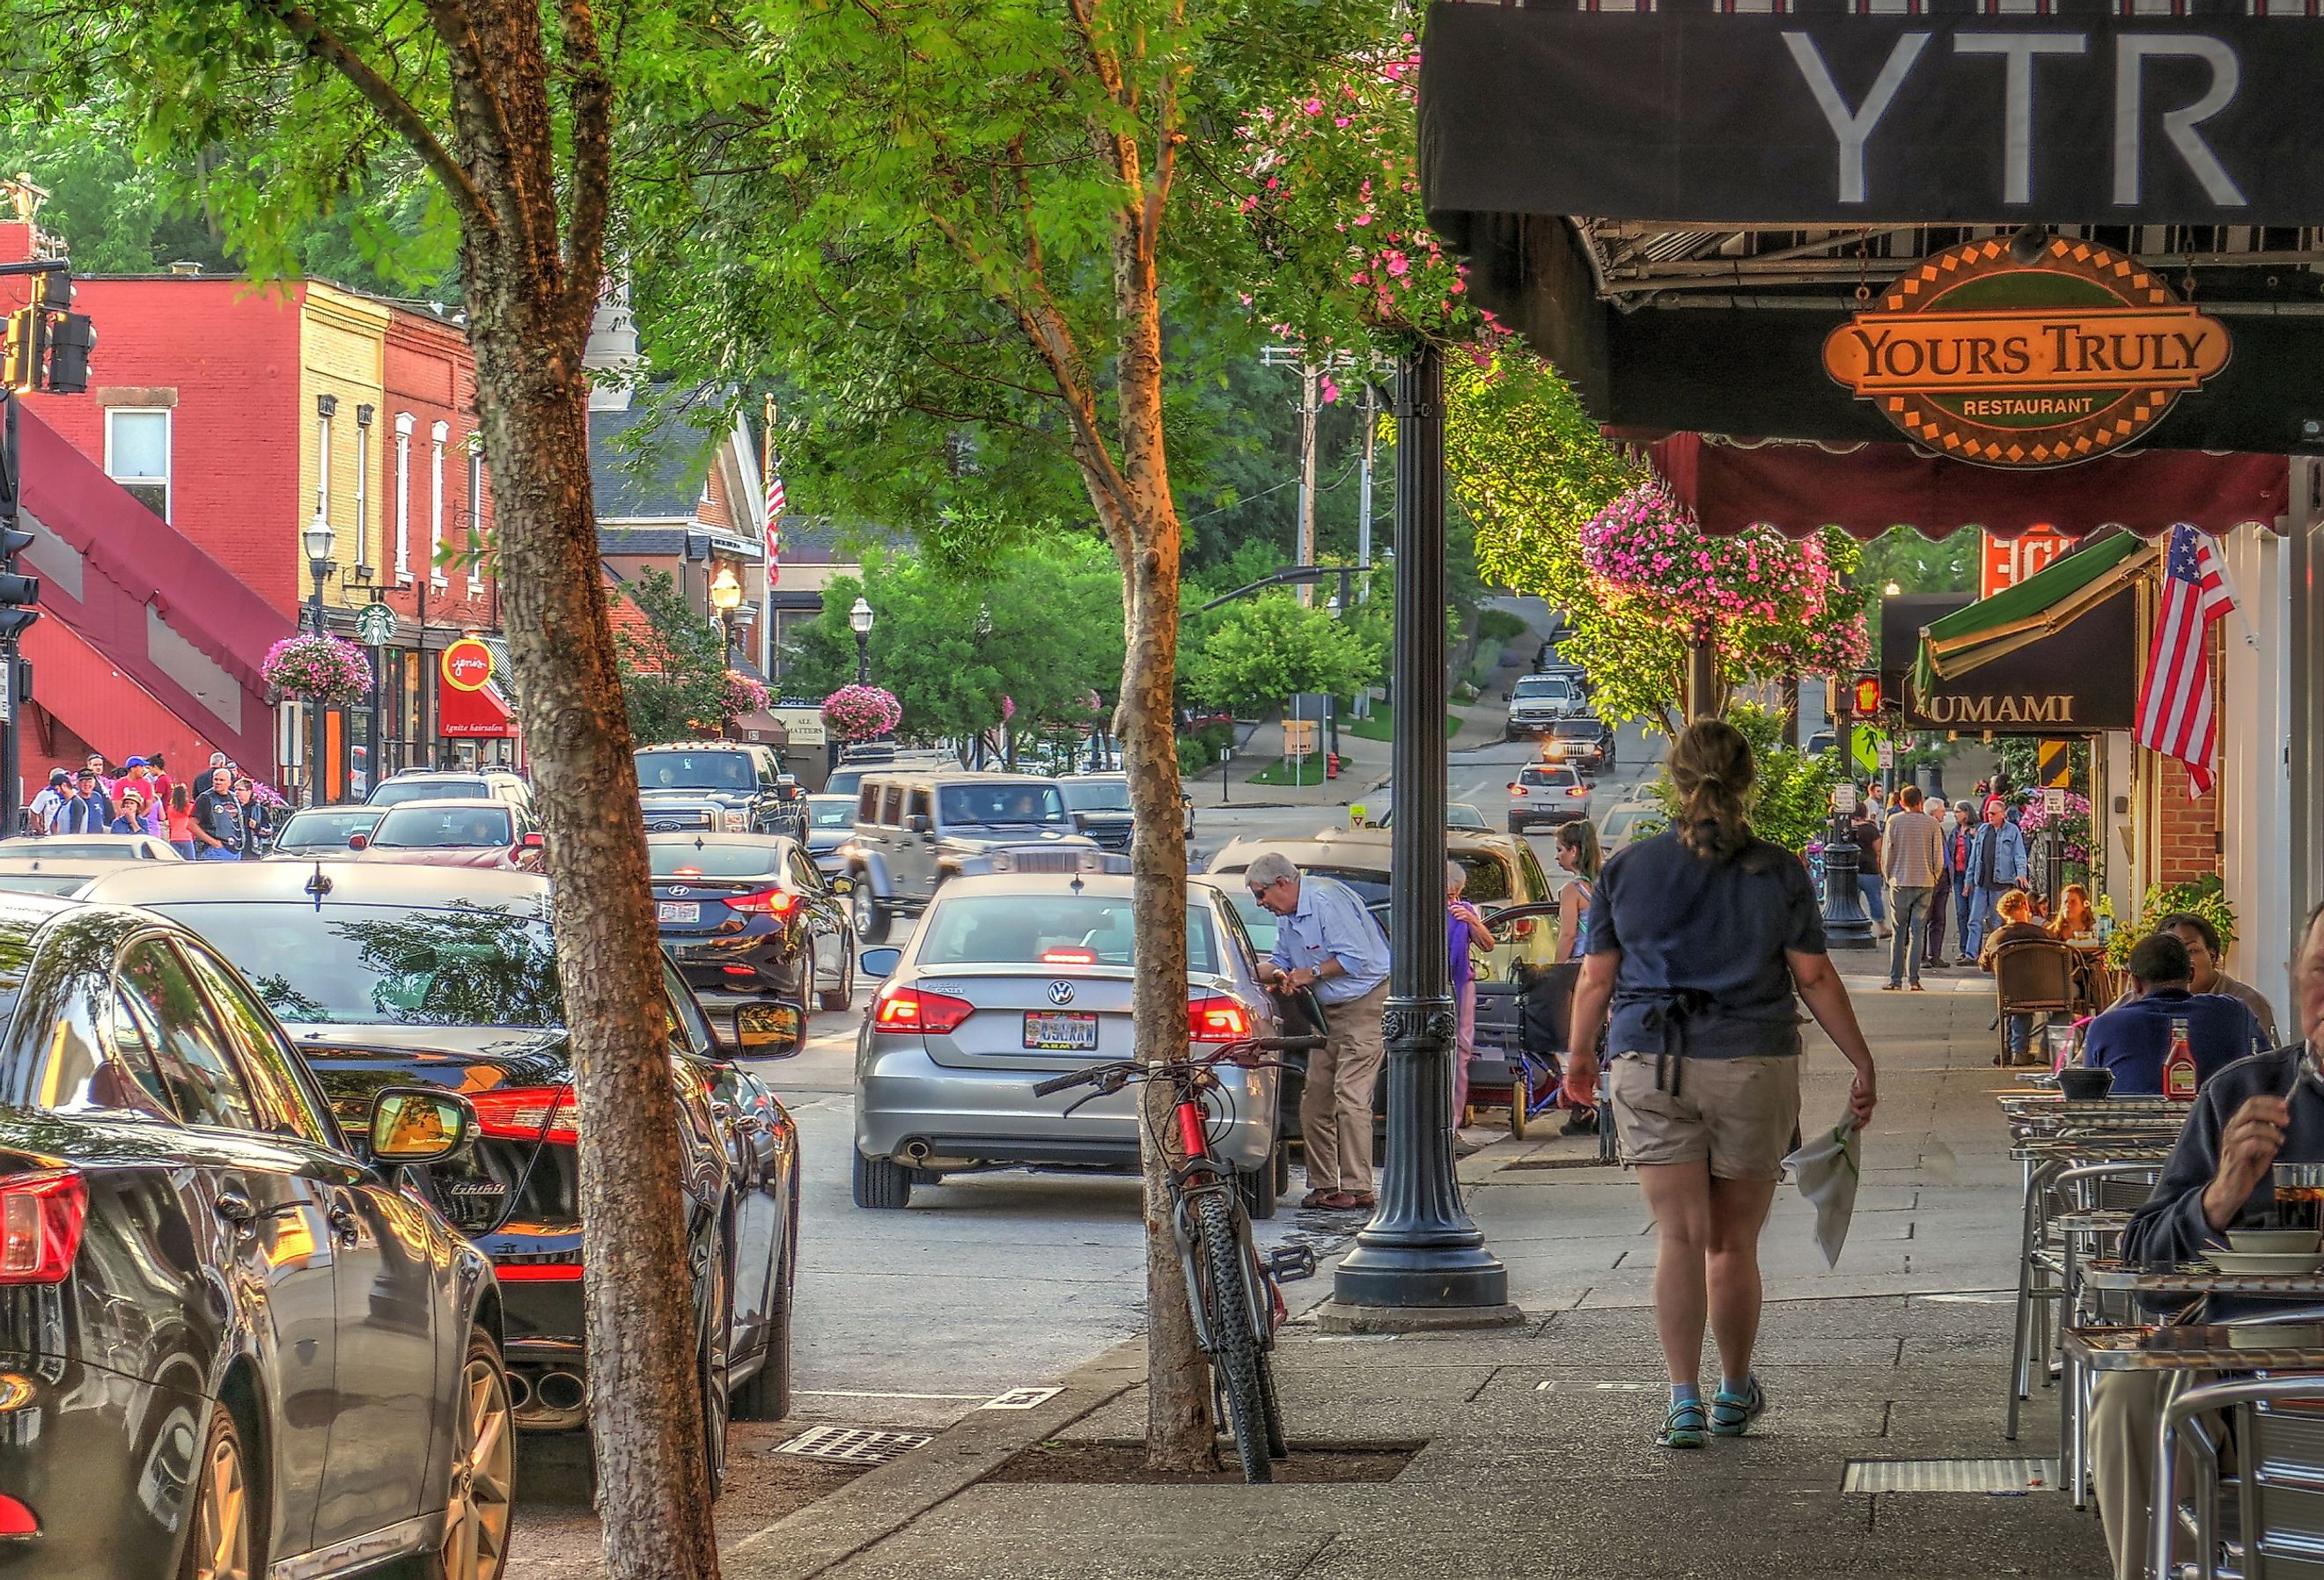 Main Street in the Upscale Historic Village of Chagrin Falls, Ohio. Image credit Lynne Neuman via Shutterstock